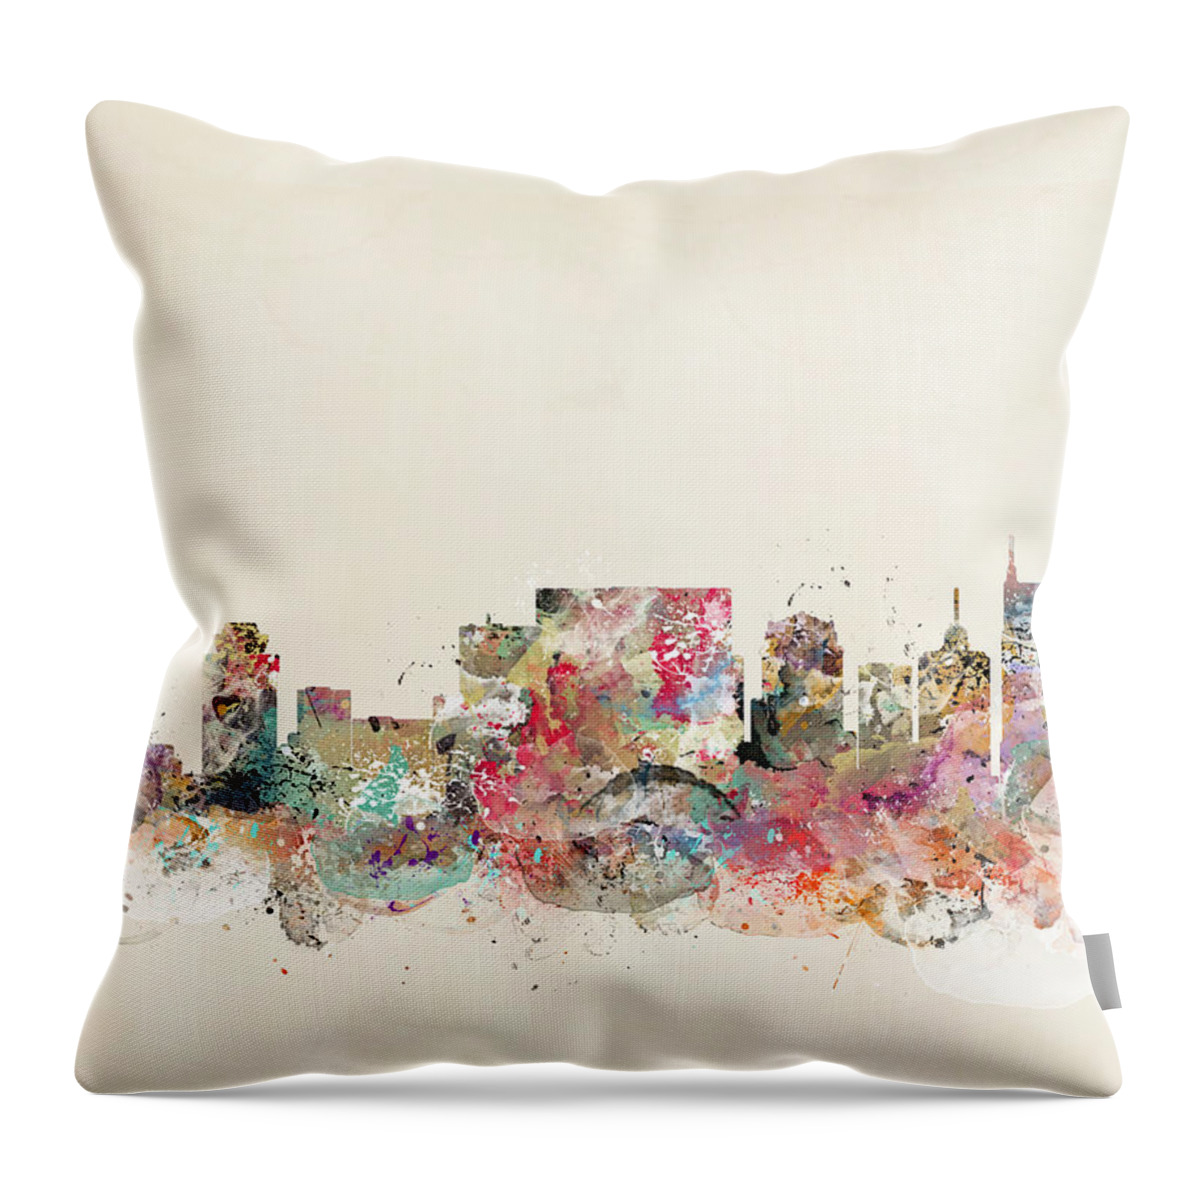 Nashville Throw Pillow featuring the painting Nashville Tennessee Skyline by Bri Buckley